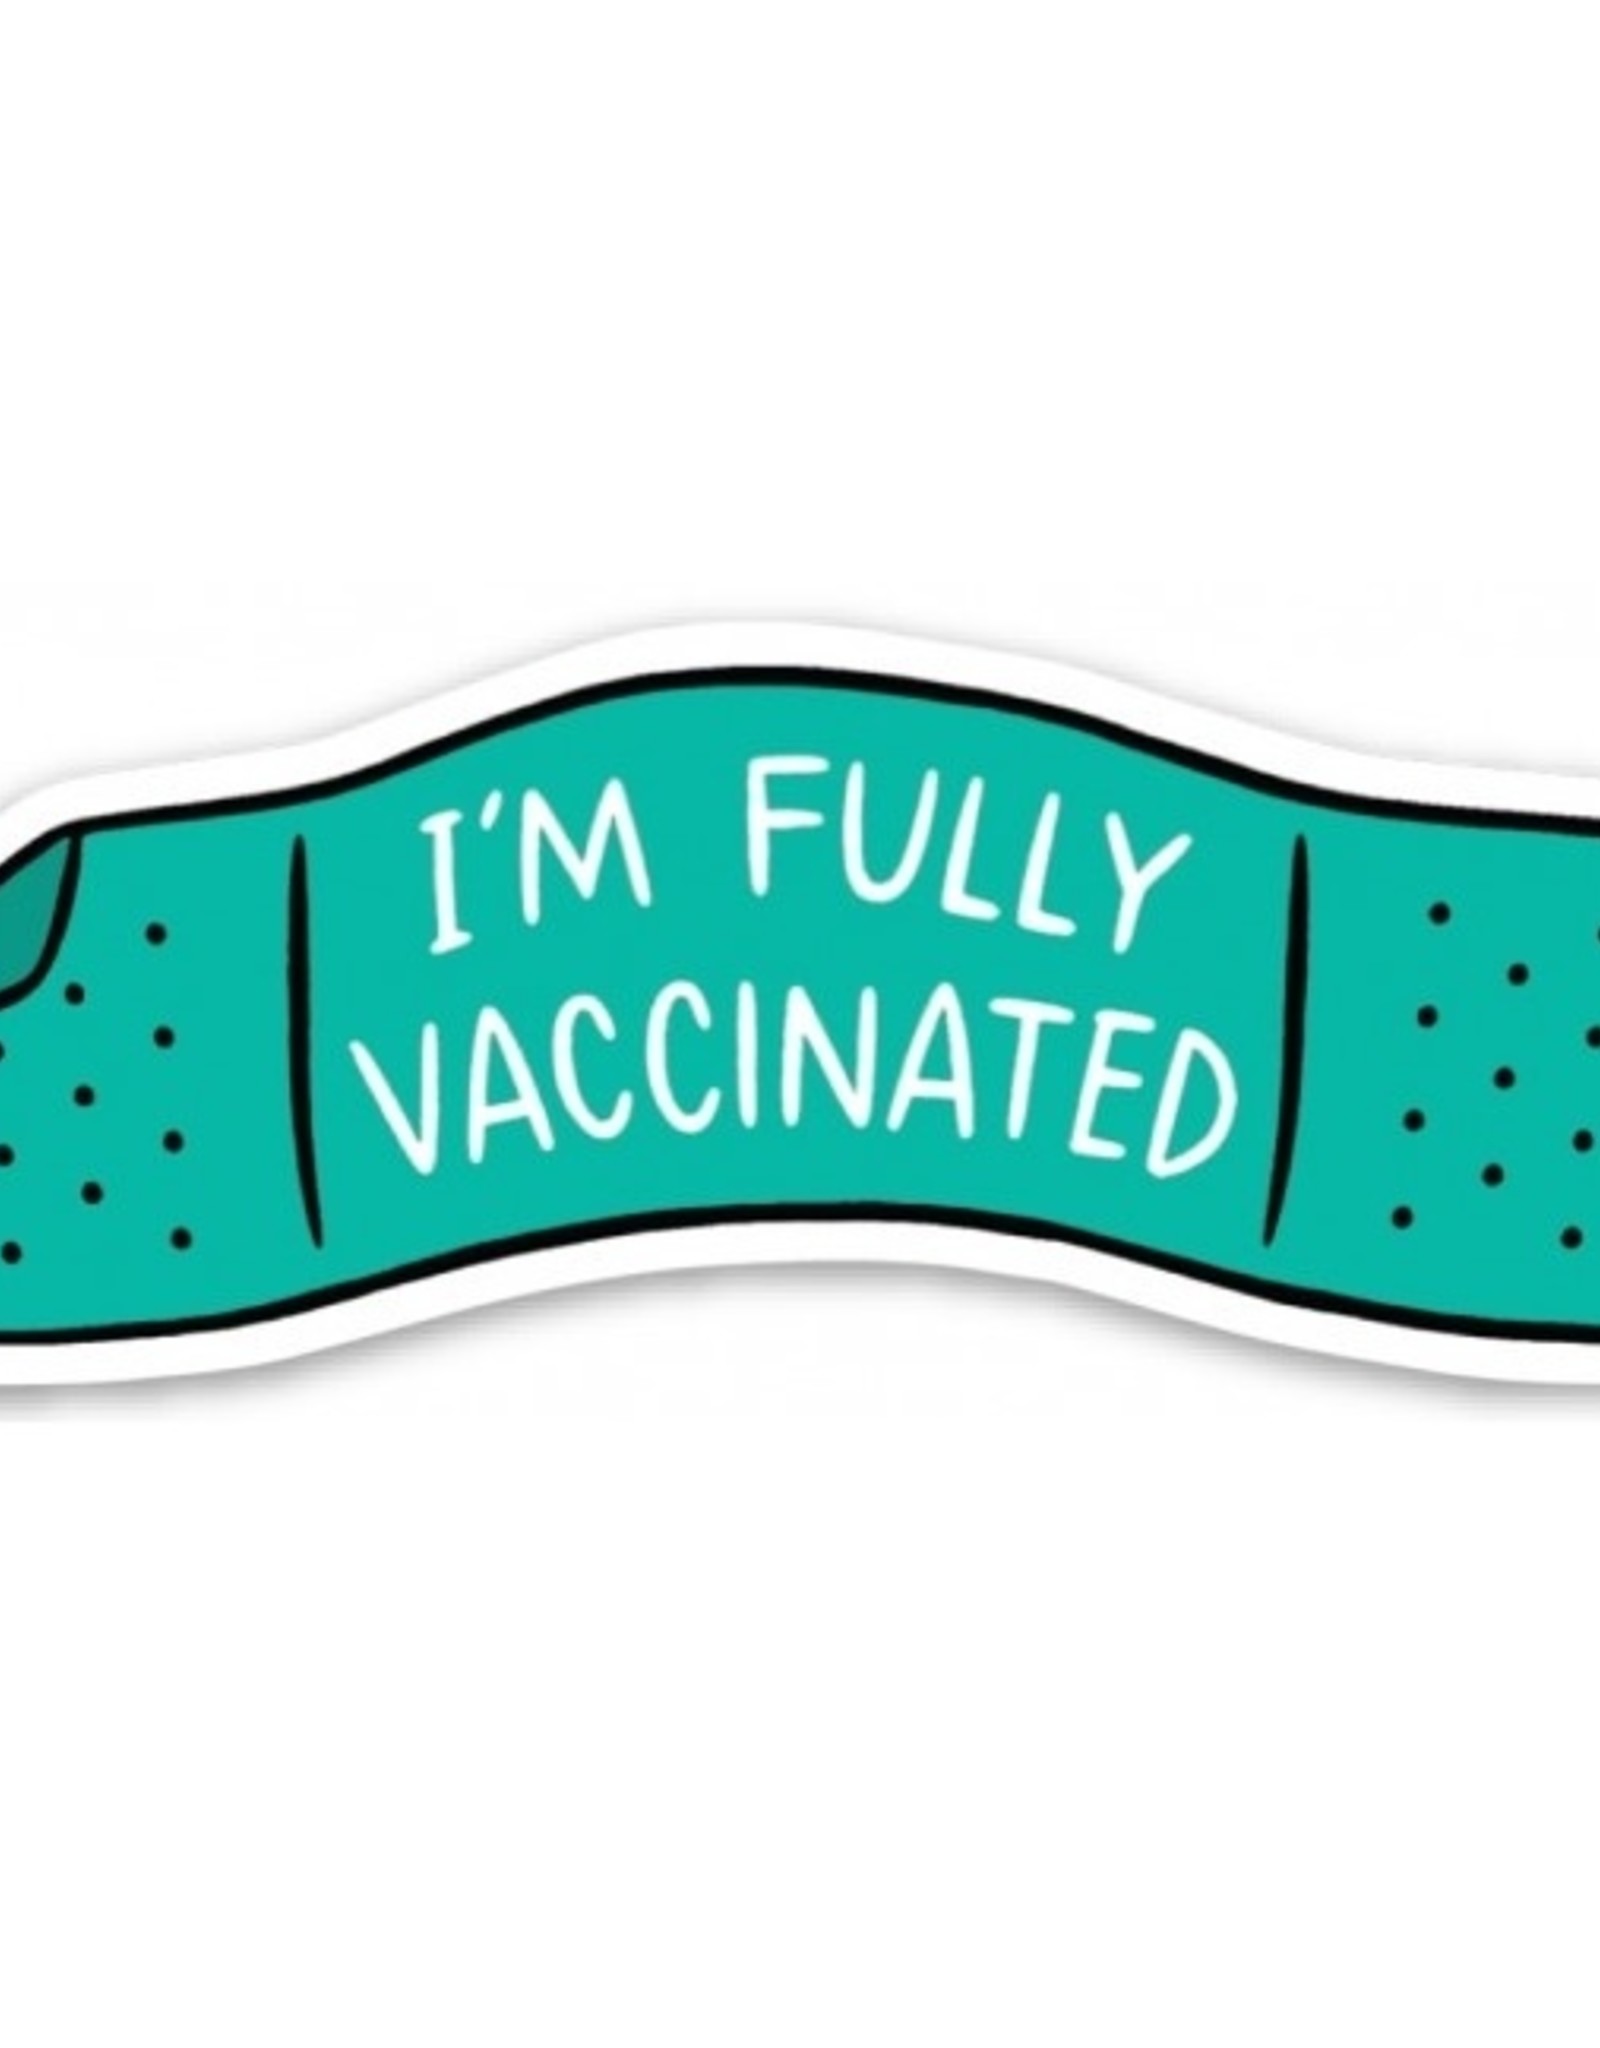 The Found Sticker - Vaccinated Band Aid